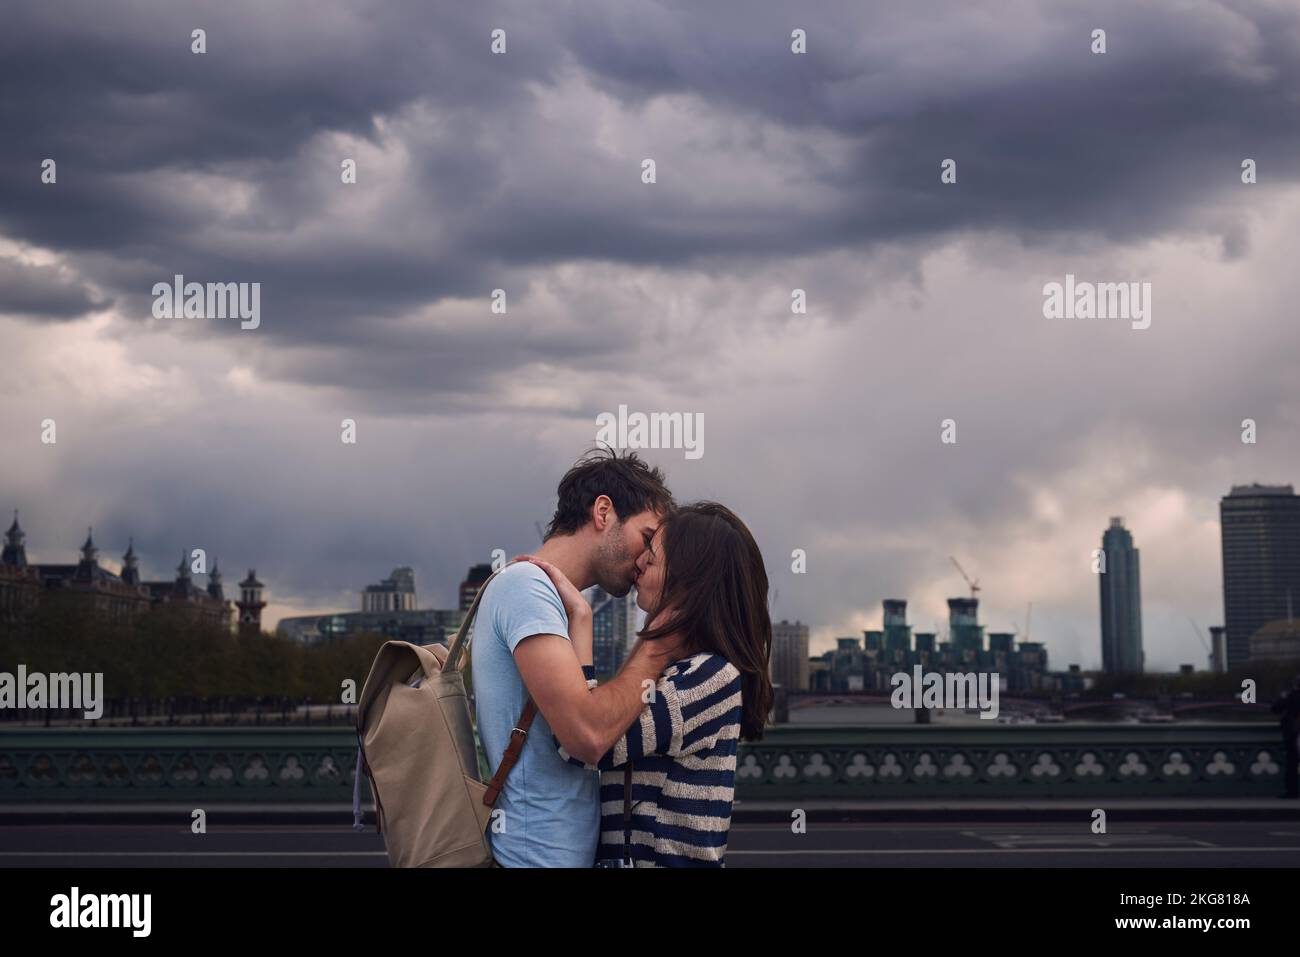 Love, couple and kiss on city bridge or outdoors in town on vacation, trip or holiday, Cloudy day, romance and affection of man and woman kissing in Stock Photo